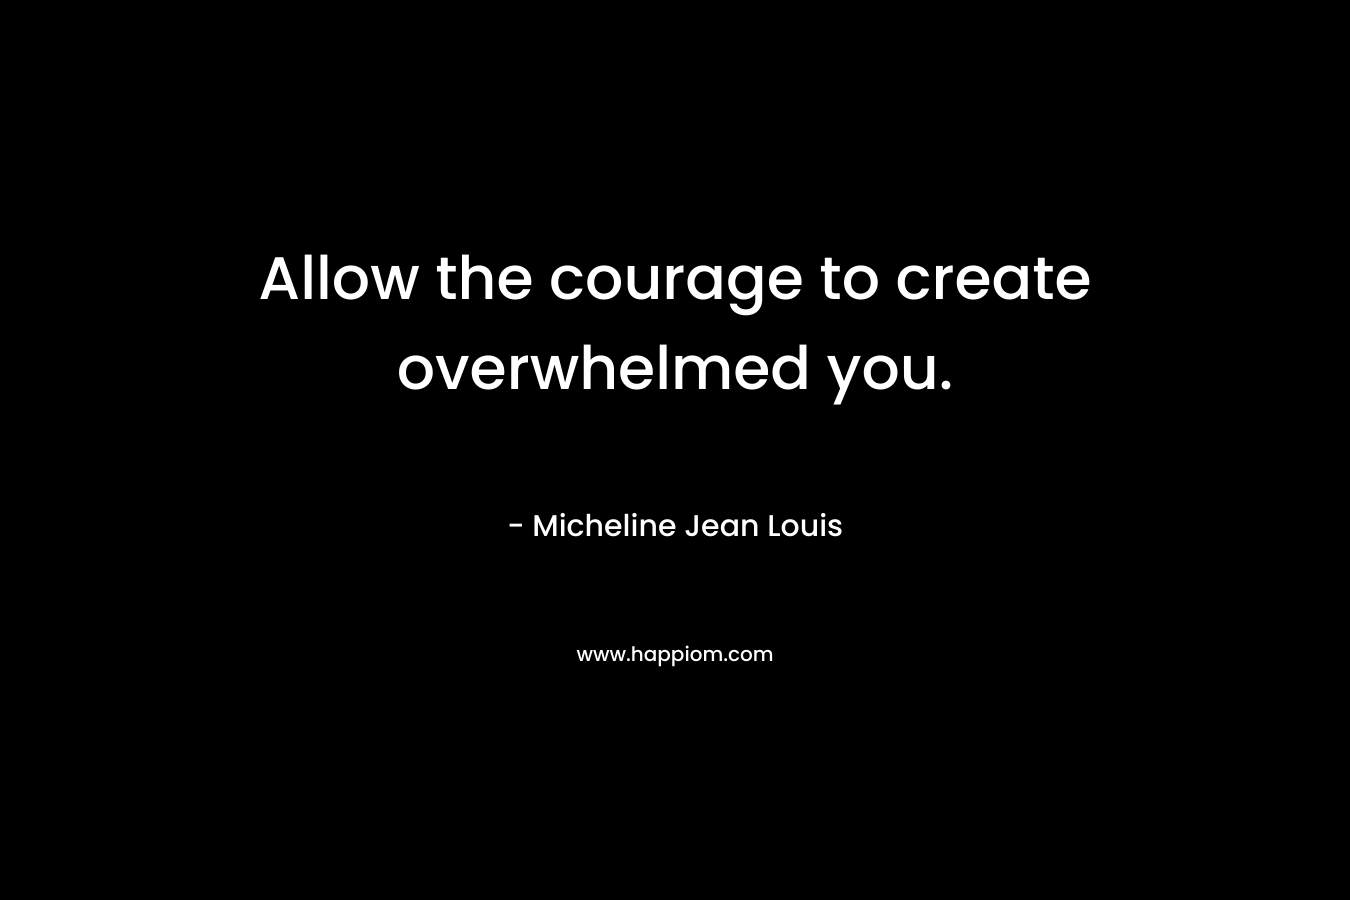 Allow the courage to create overwhelmed you. – Micheline Jean Louis